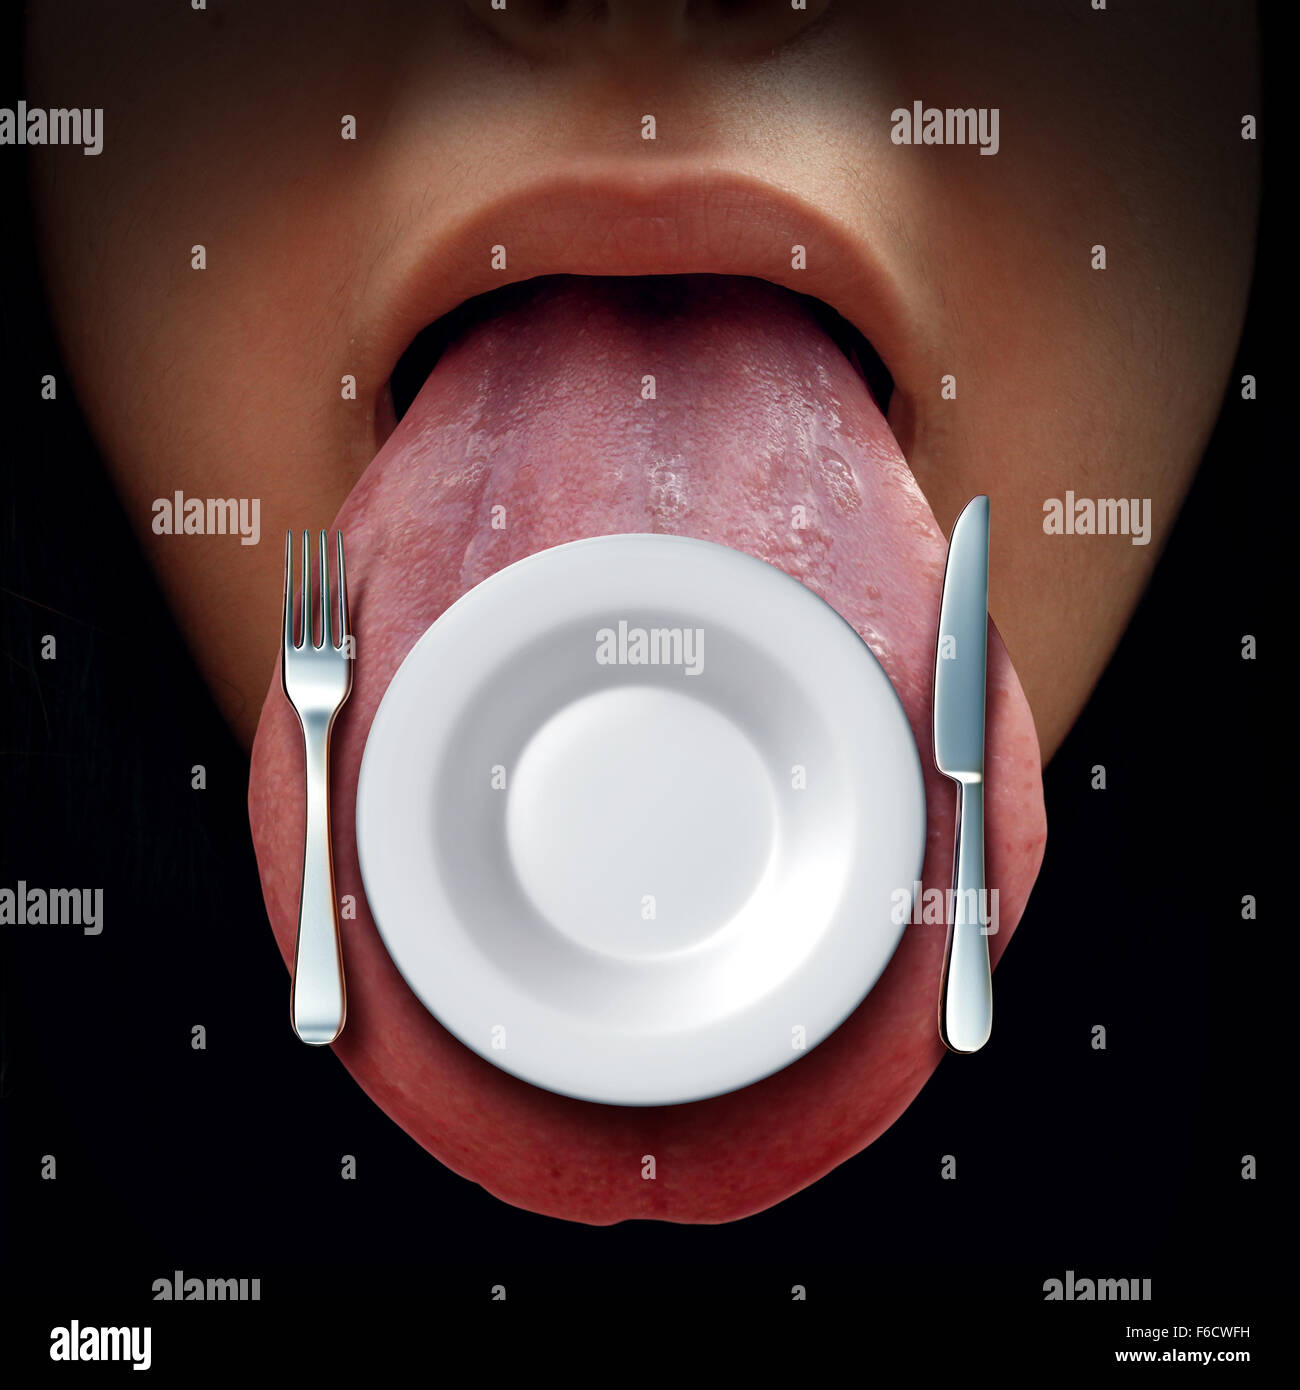 Eating time concept and dining or lunch idea symbol as an open mouth with a place setting with an empty plate knife and fork on Stock Photo